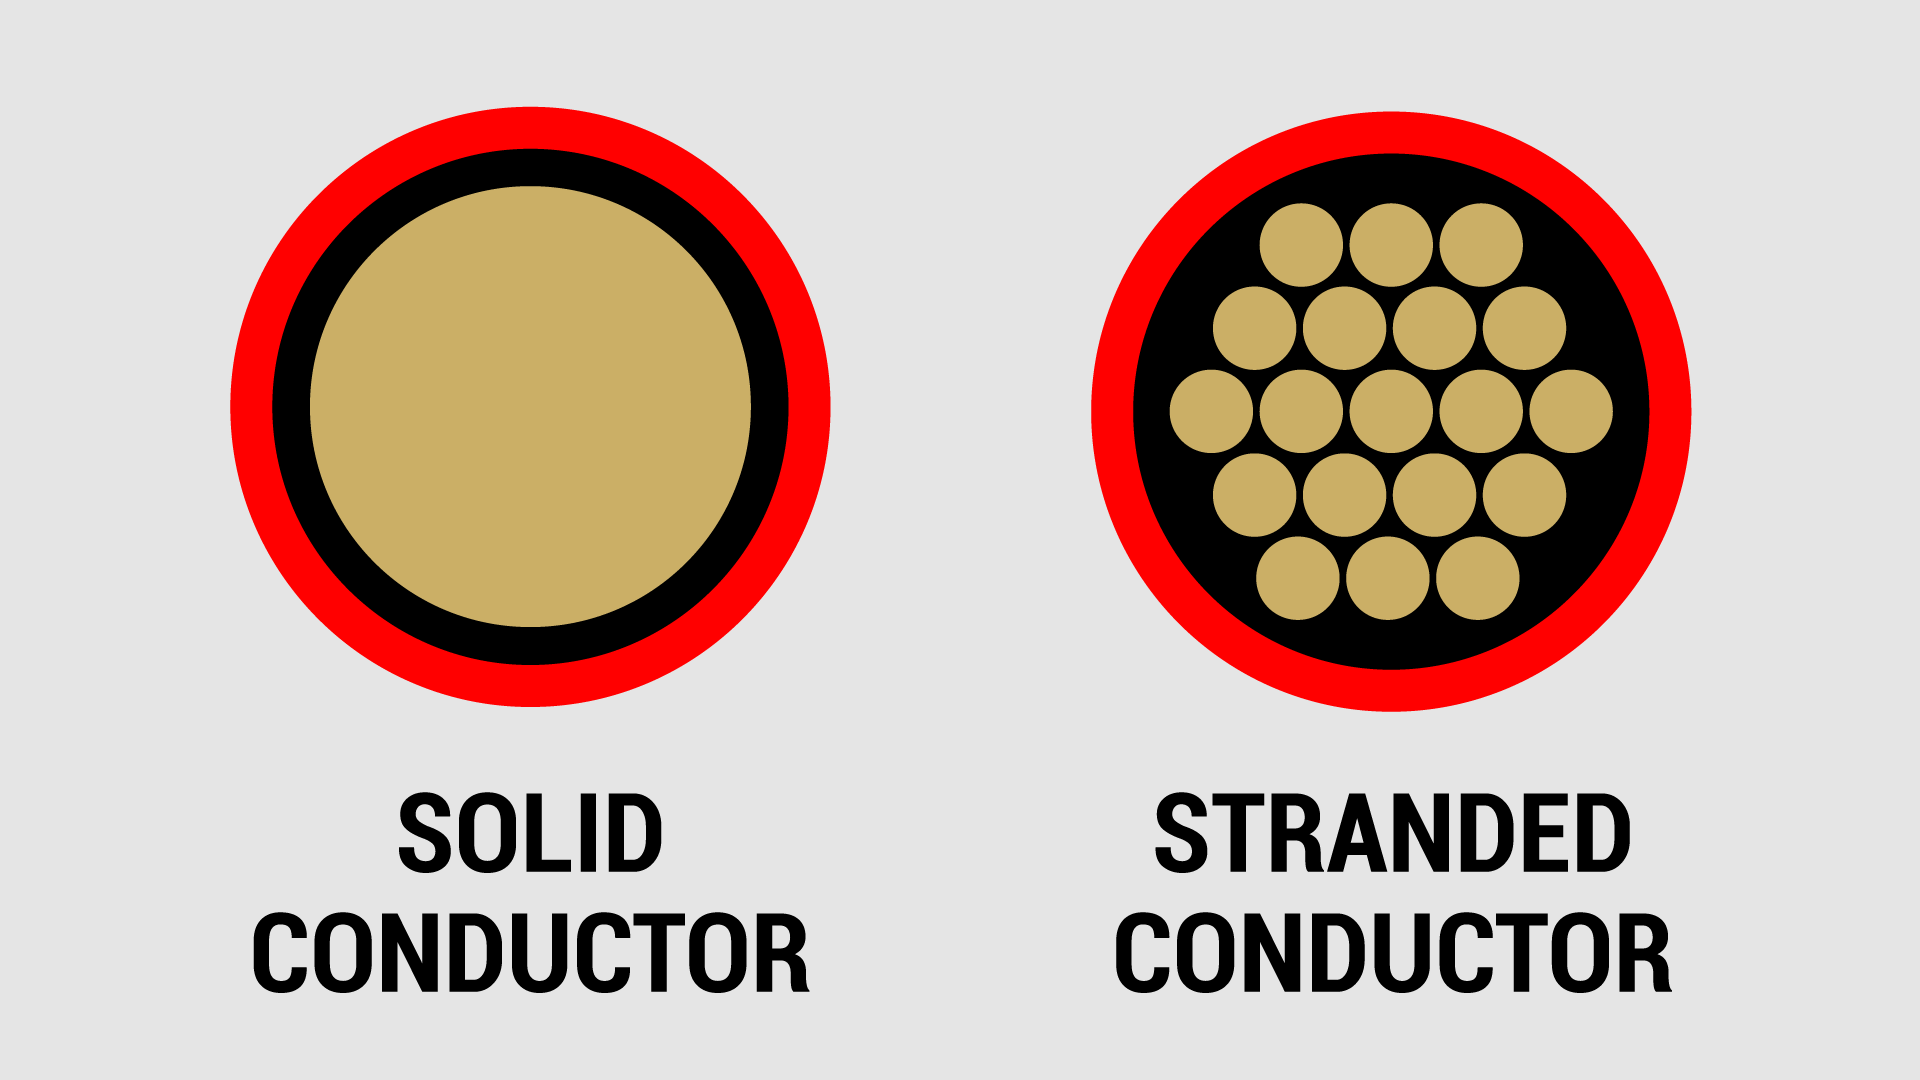 Internal Look At The Conductor Of A Wire